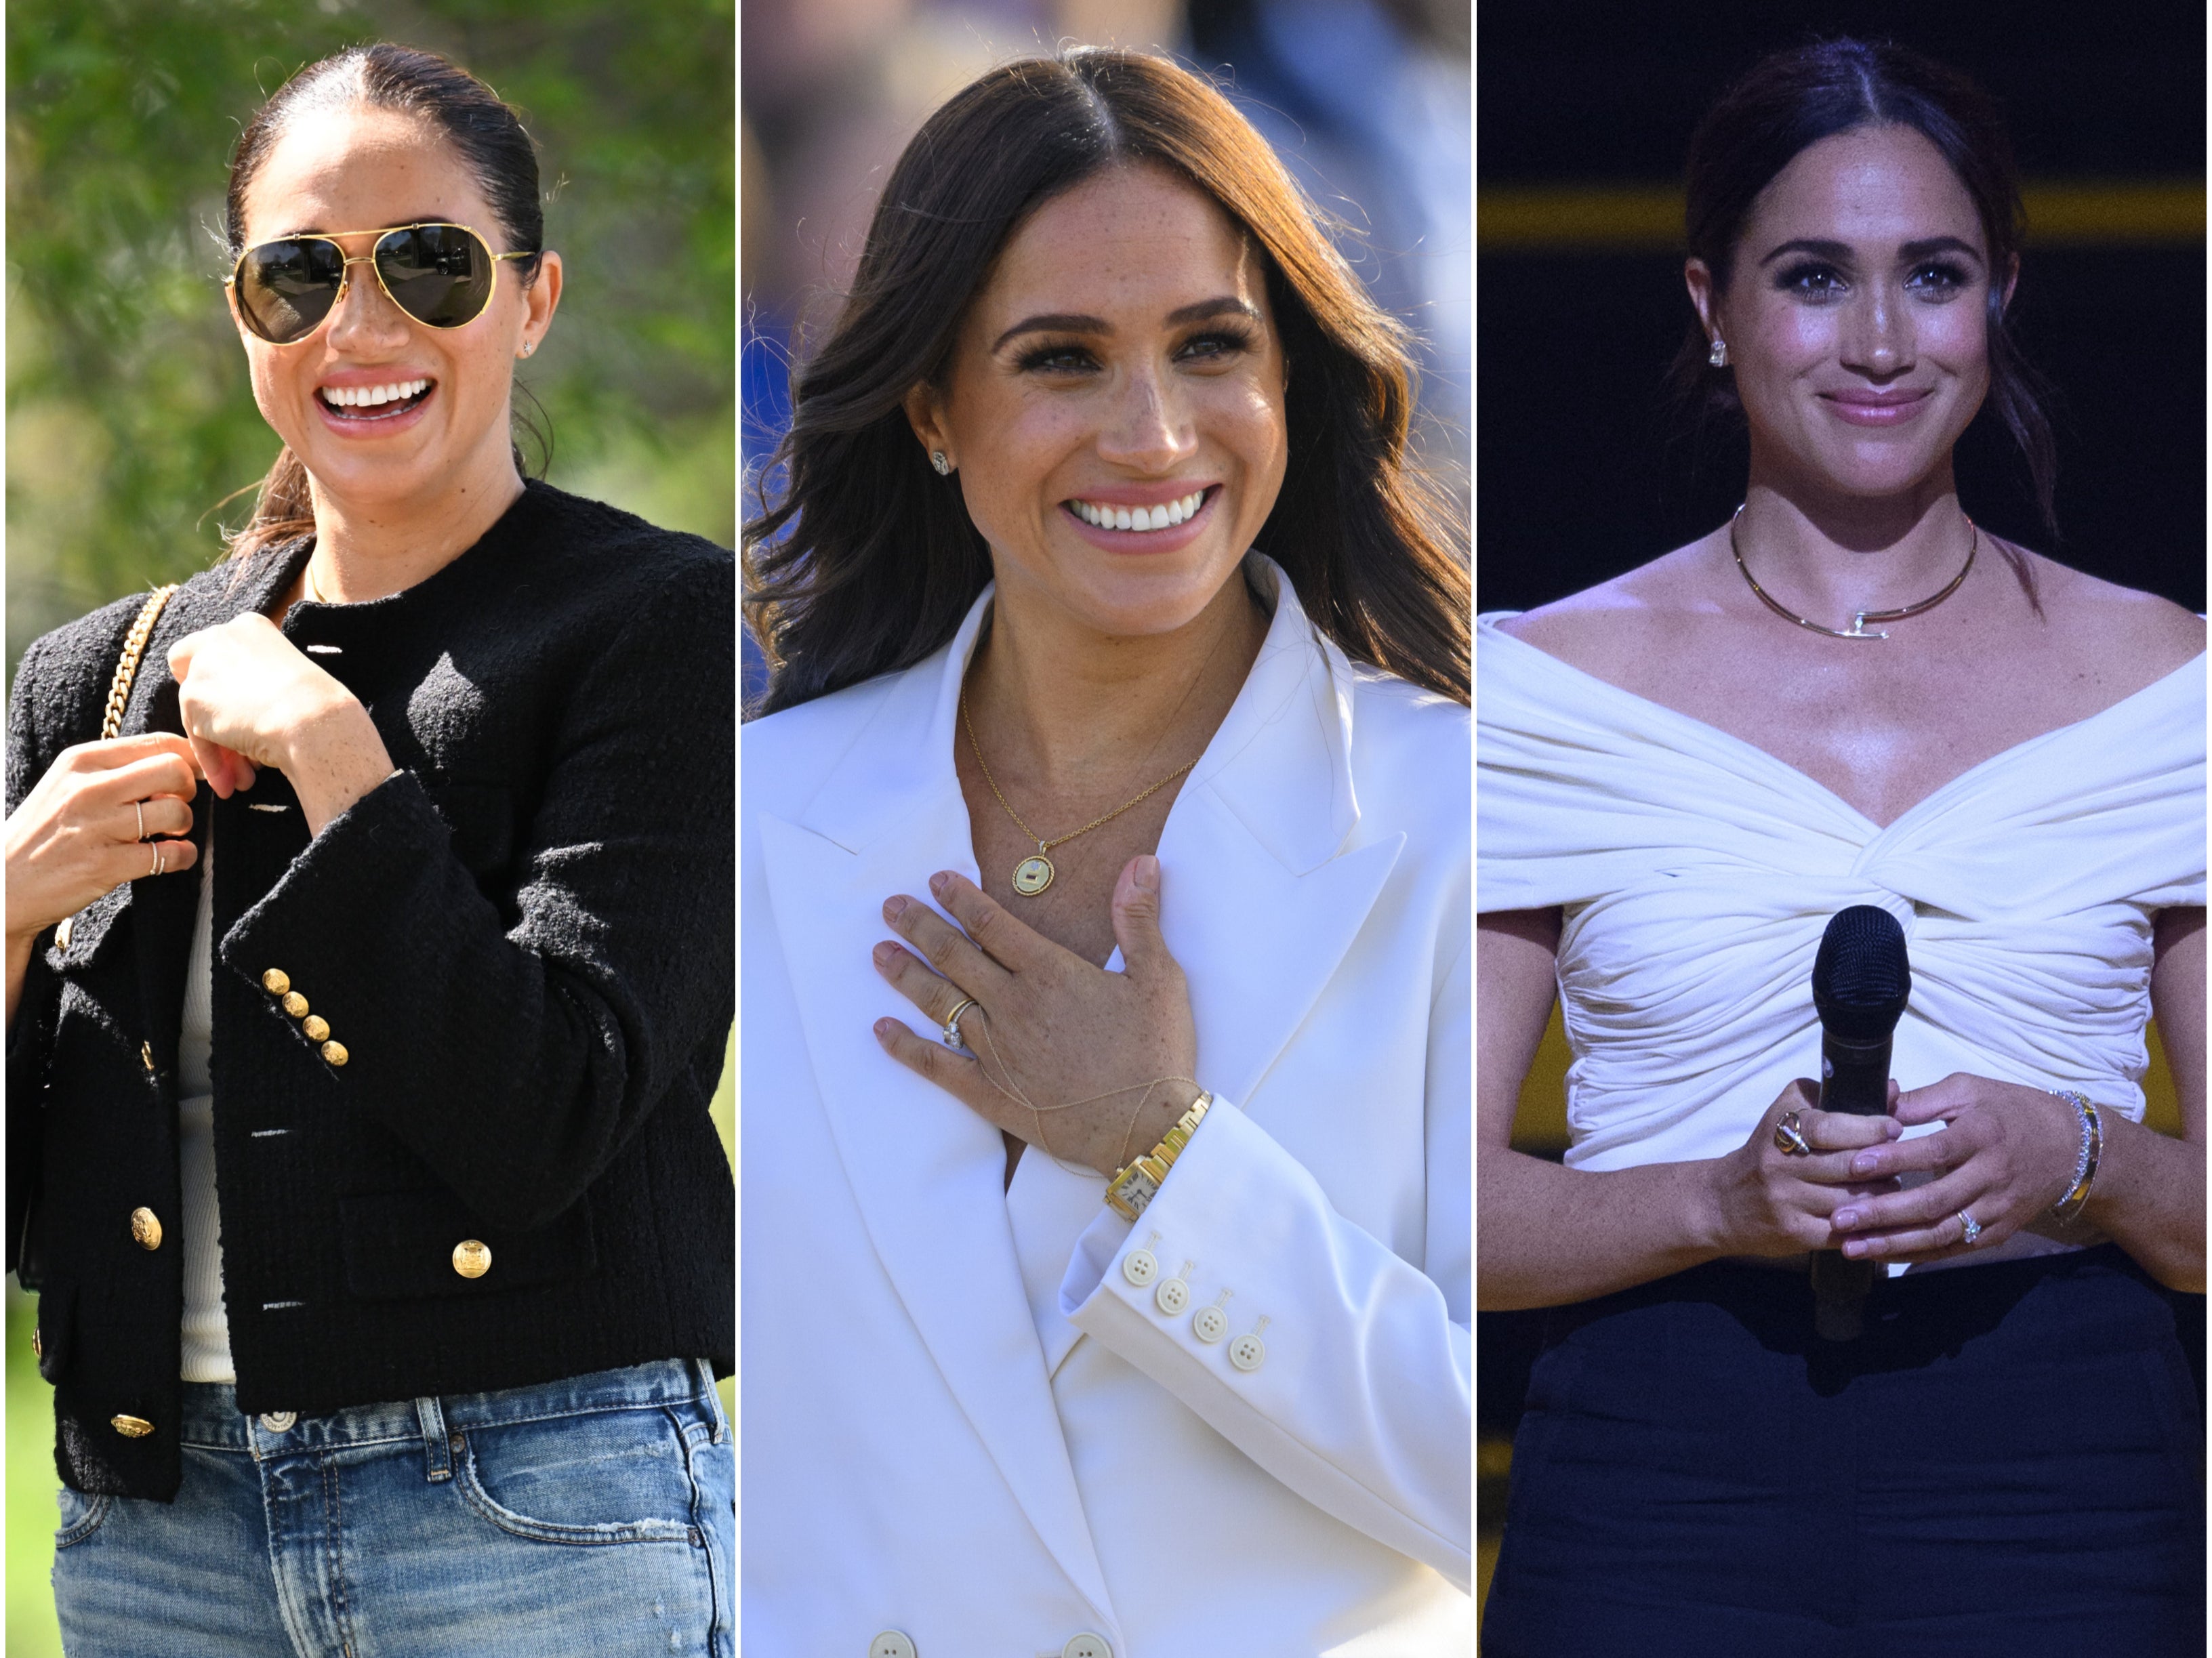 Meghan Markle is attending the Invictus Games